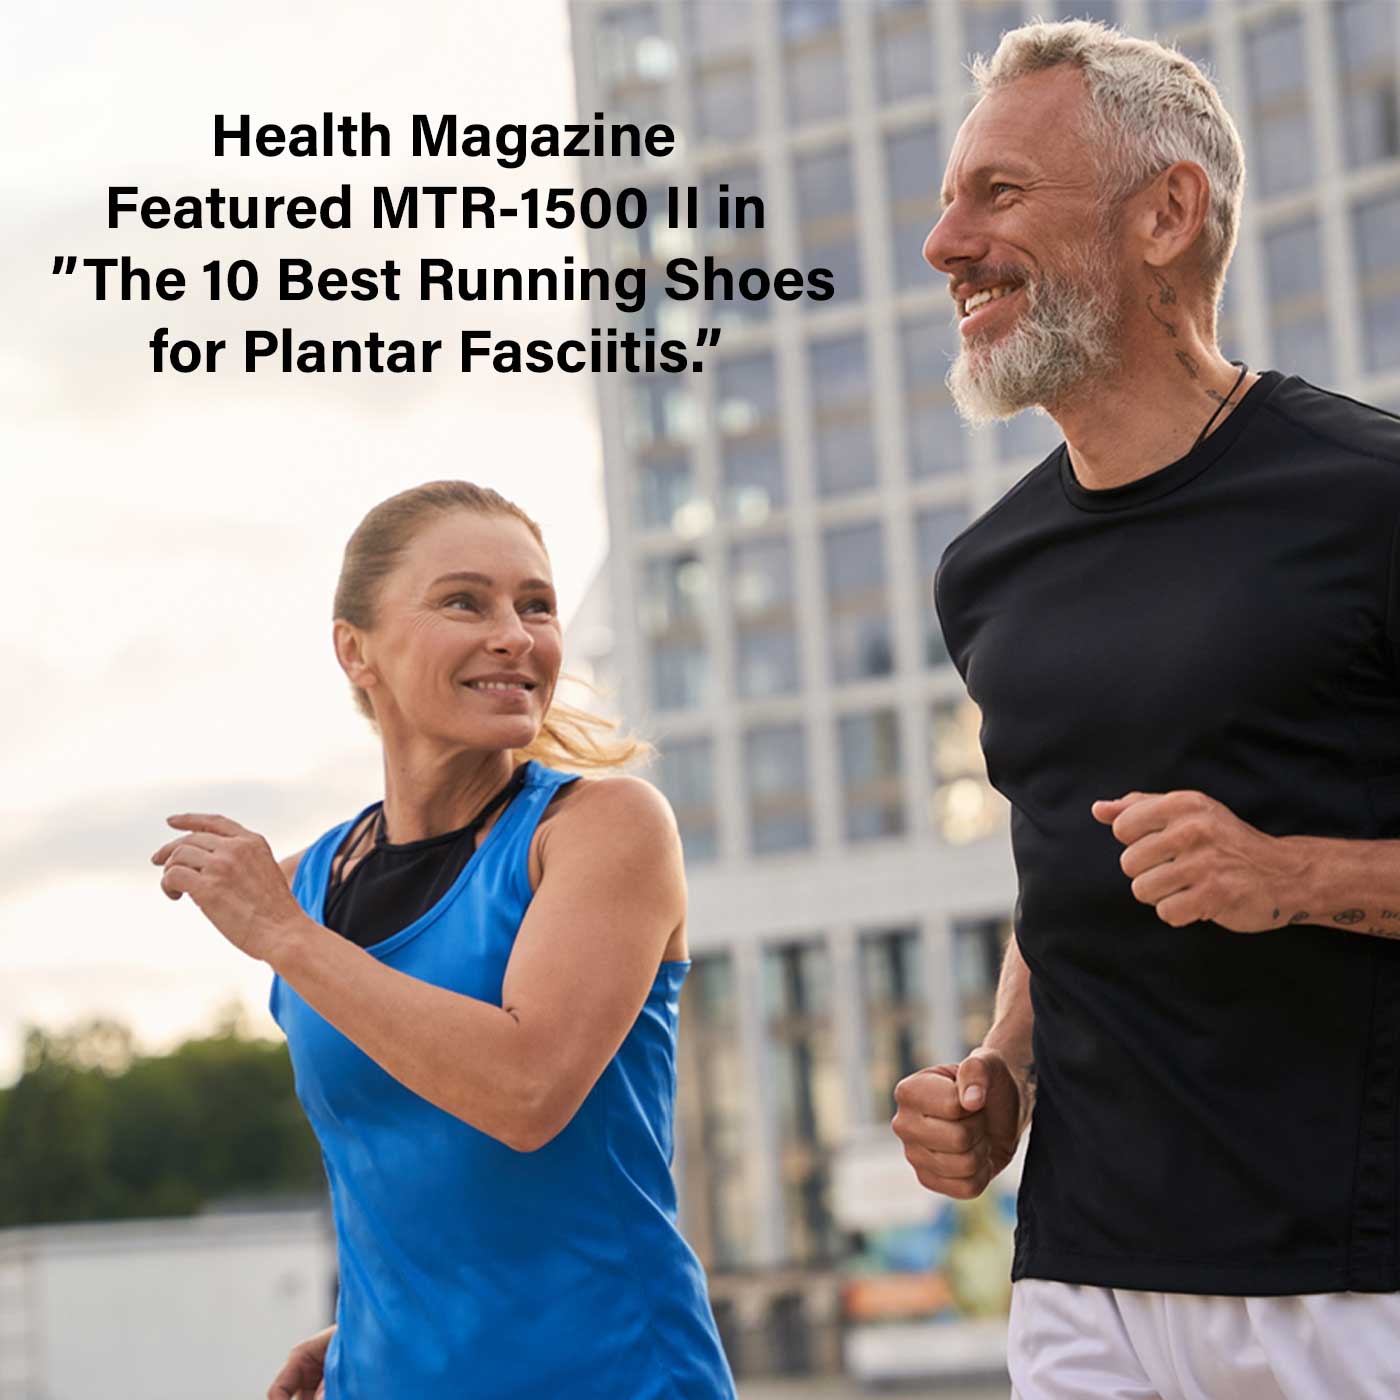 Health Magazine Featured MTR-1500 II as The 10 Best Running Shoes for Plantar Fasciitis.